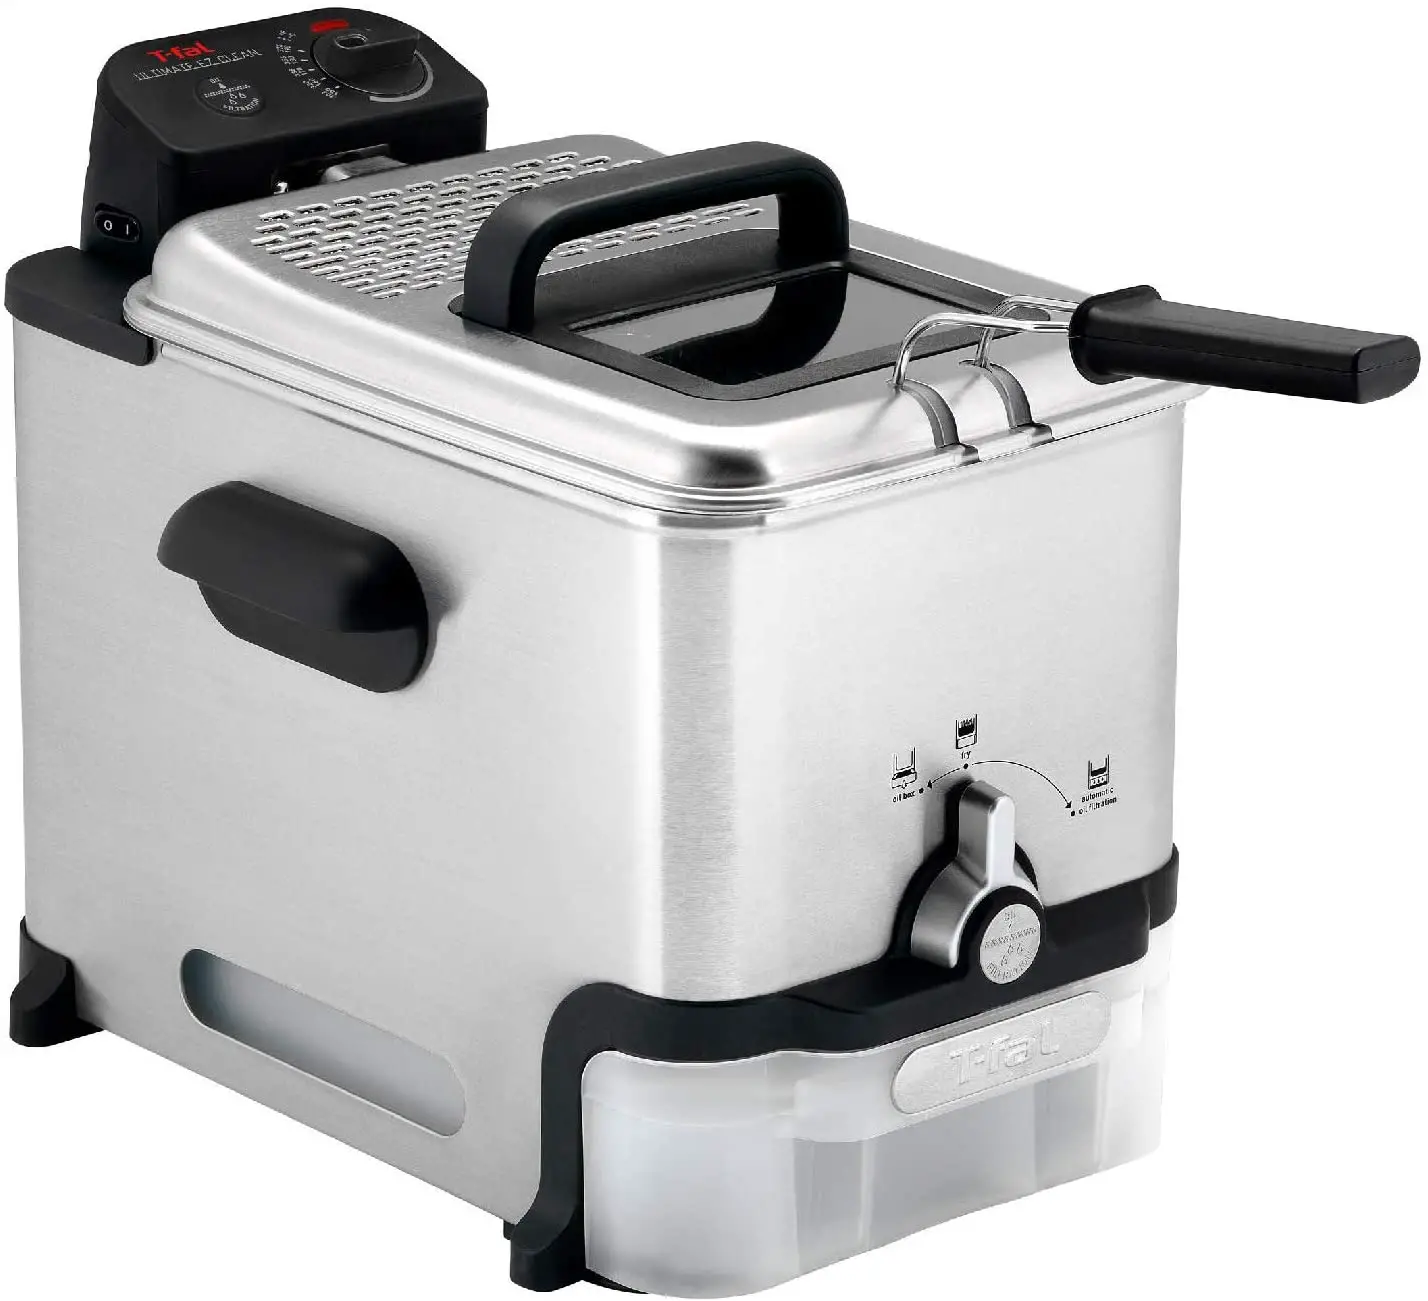 T-Fal FR8000 Deep Fryer with Basket is one of the Best Deep Fryers For A Large Family with odor filter, filtered oil tank and cool touch handle